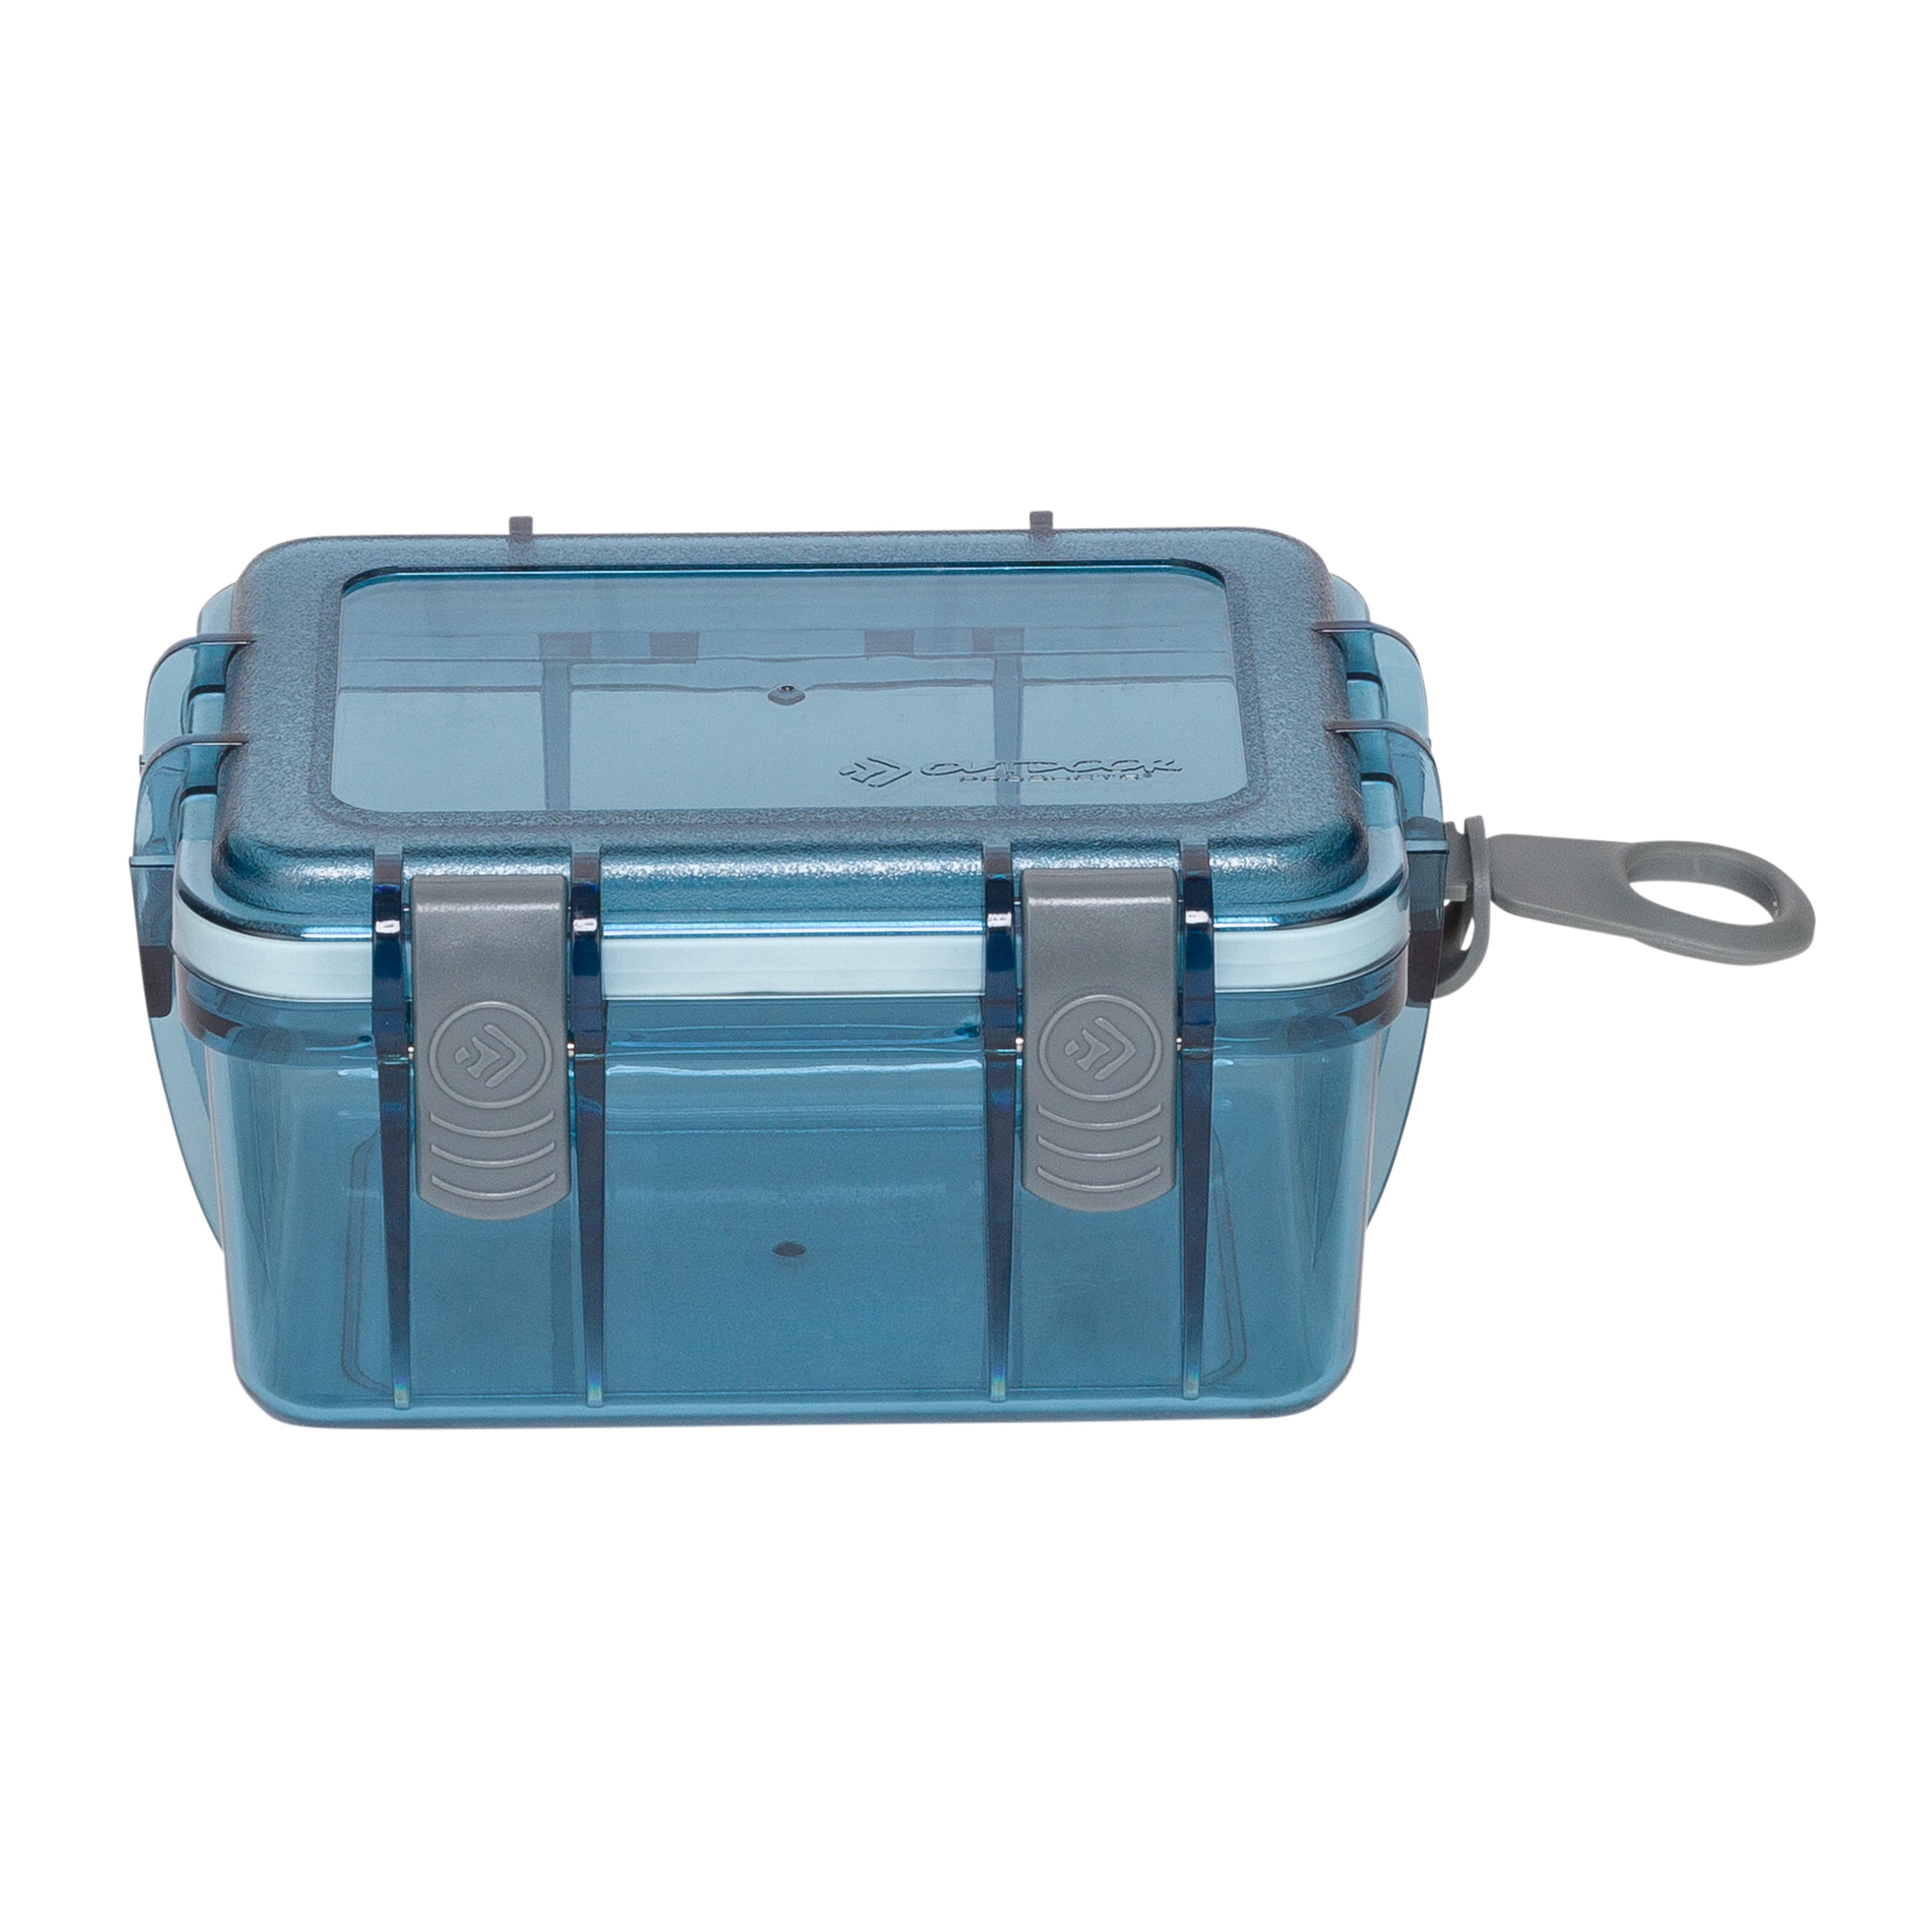 Waterproof Storage Container Swimming Keep Dry Floating Money Box Case Keep Safe 